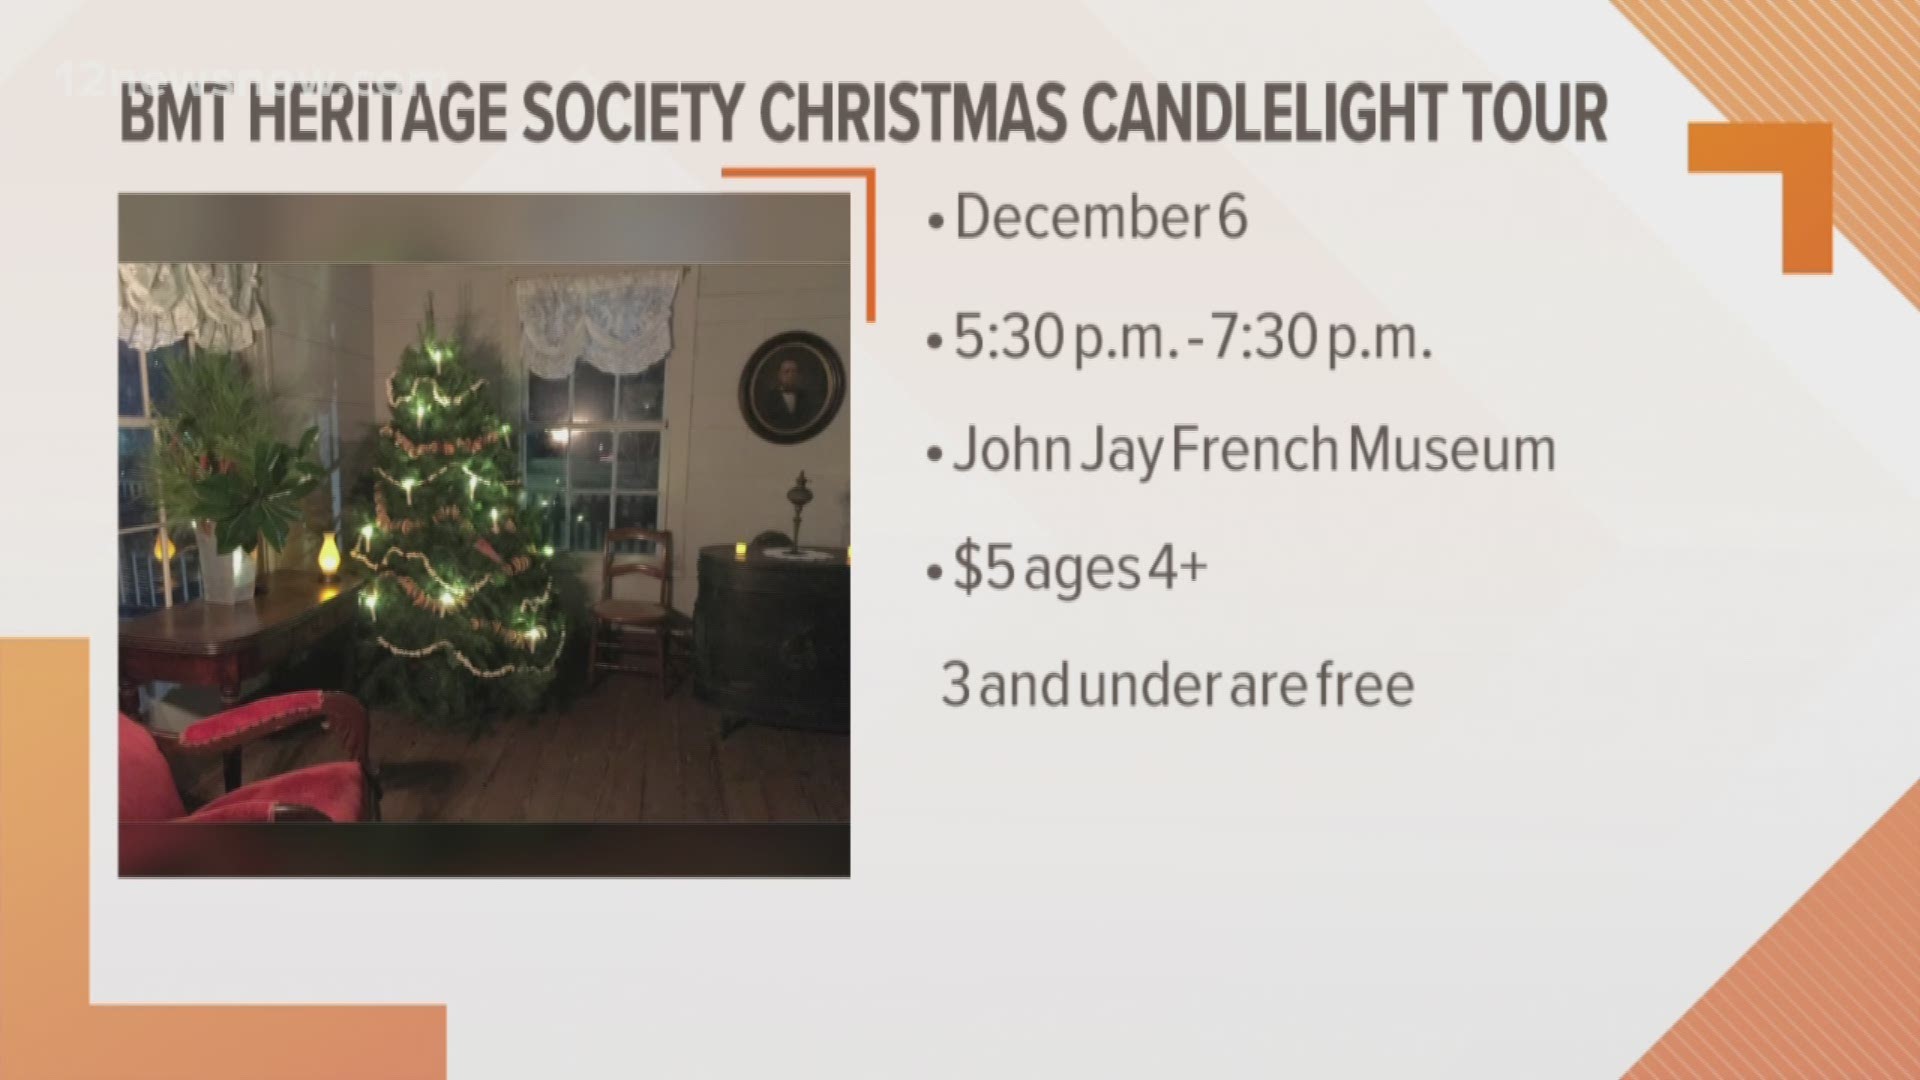 The Beaumont Heritage Society is hosting a Christmas candlelight tour!